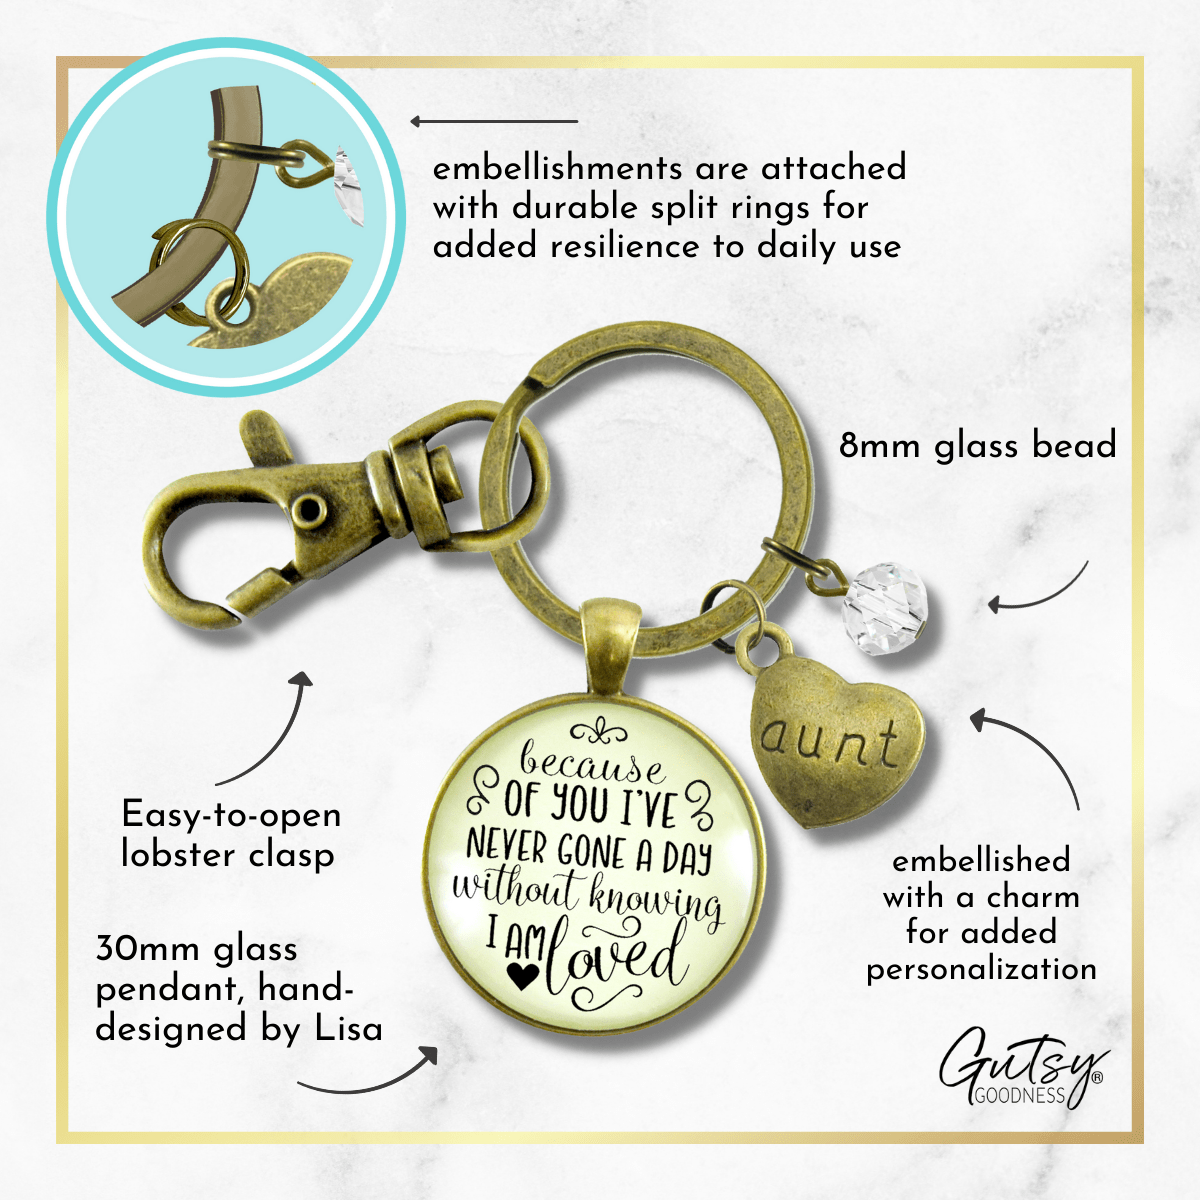 Aunt Keychain Because Of Your Love Sentimental Gift Family Jewelry - Gutsy Goodness Handmade Jewelry;Aunt Keychain Because Of Your Love Sentimental Gift Family Jewelry - Gutsy Goodness Handmade Jewelry Gifts